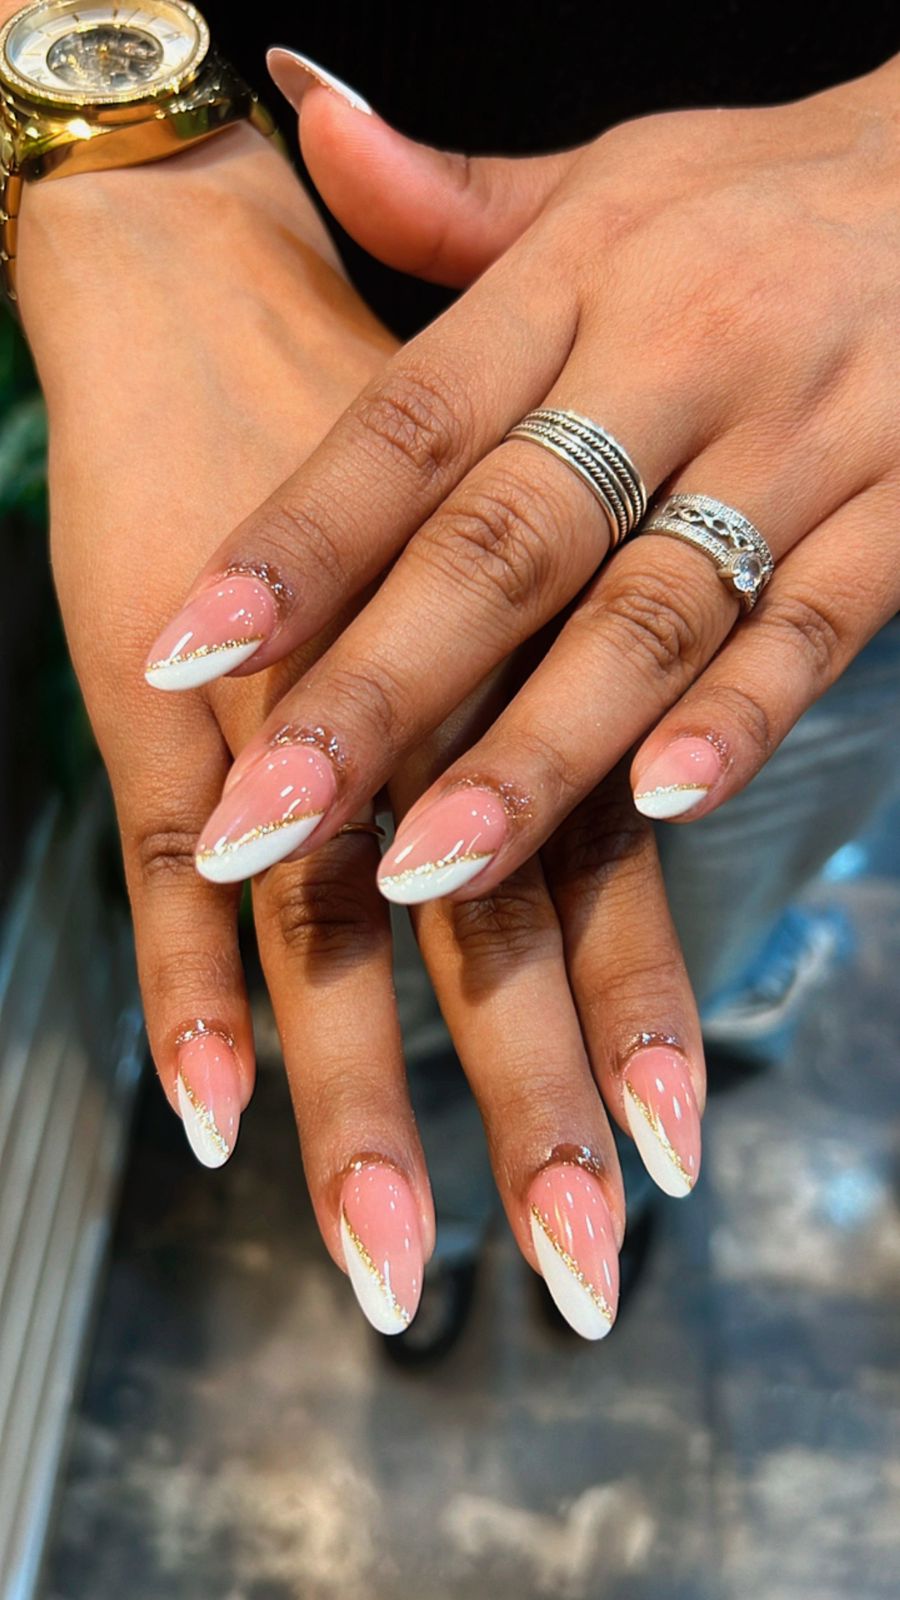 🩵Glossy Icy 💅Exclusively done at Claire's Nail Studio @claires_nailstudio  📍Glue-free extensions with DIAMI 